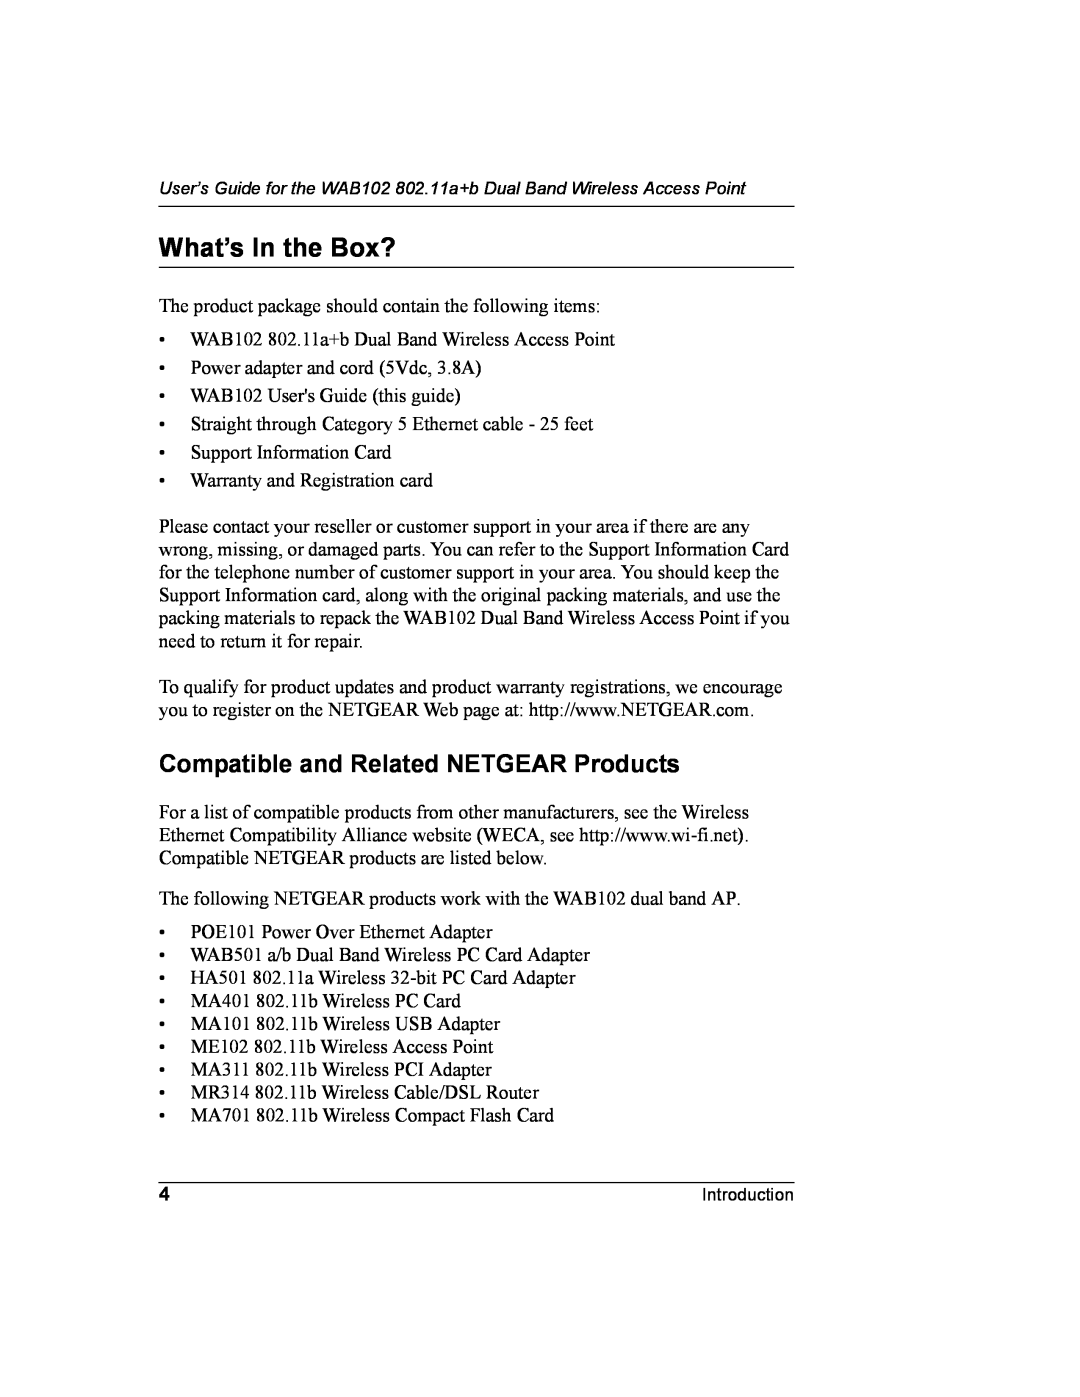 NETGEAR WAB102 manual What’s In the Box?, Compatible and Related NETGEAR Products 